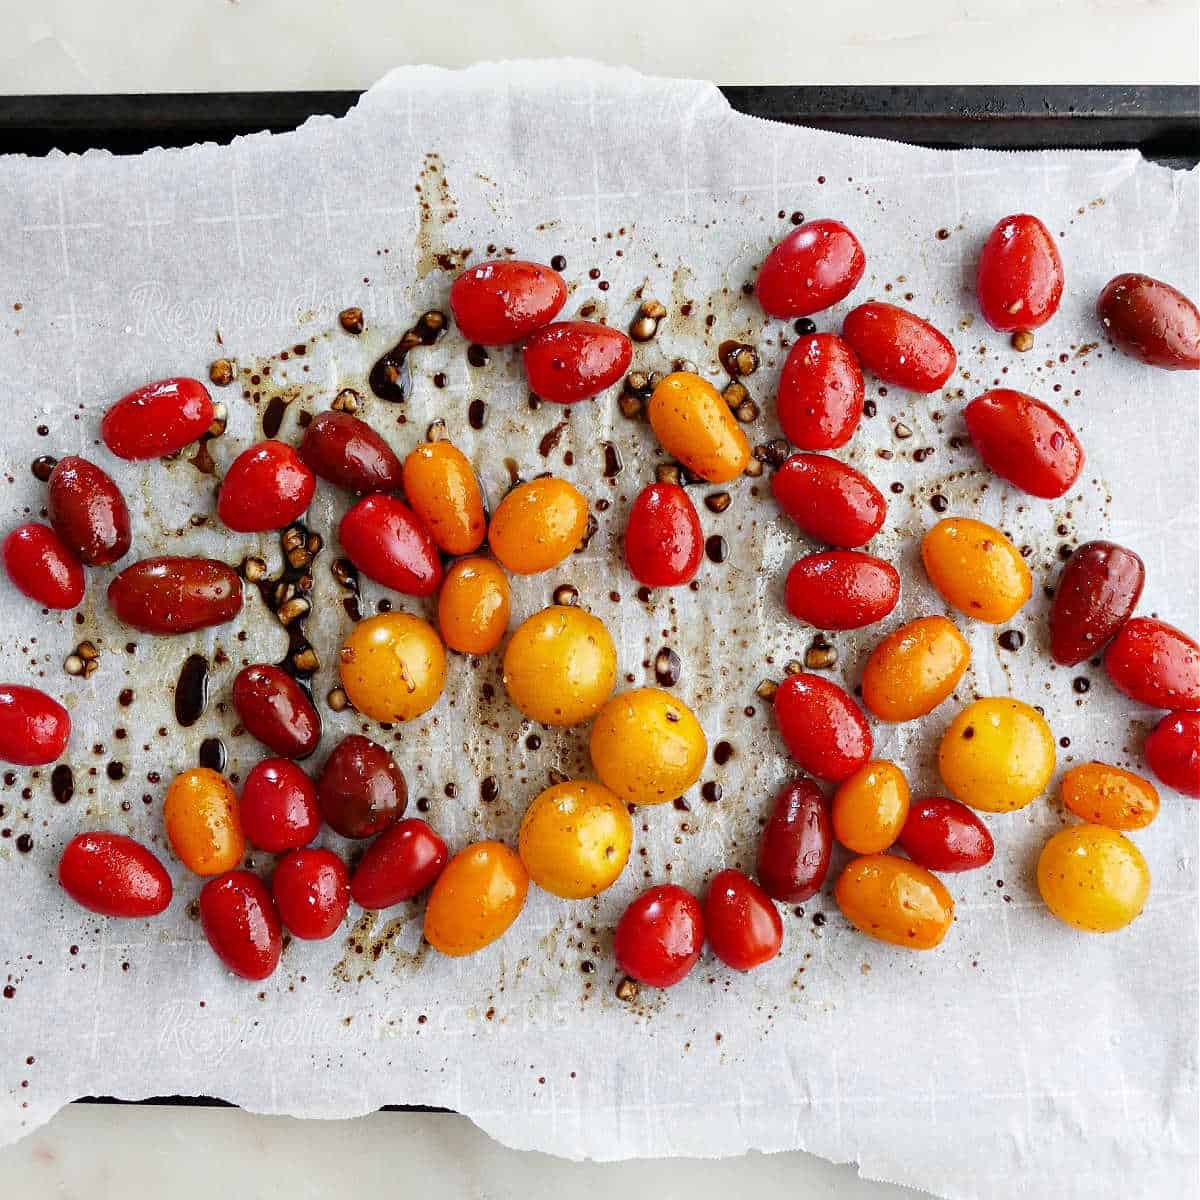 cherry tomatoes tossed with balsamic, garlic, and oil on a lined baking sheet